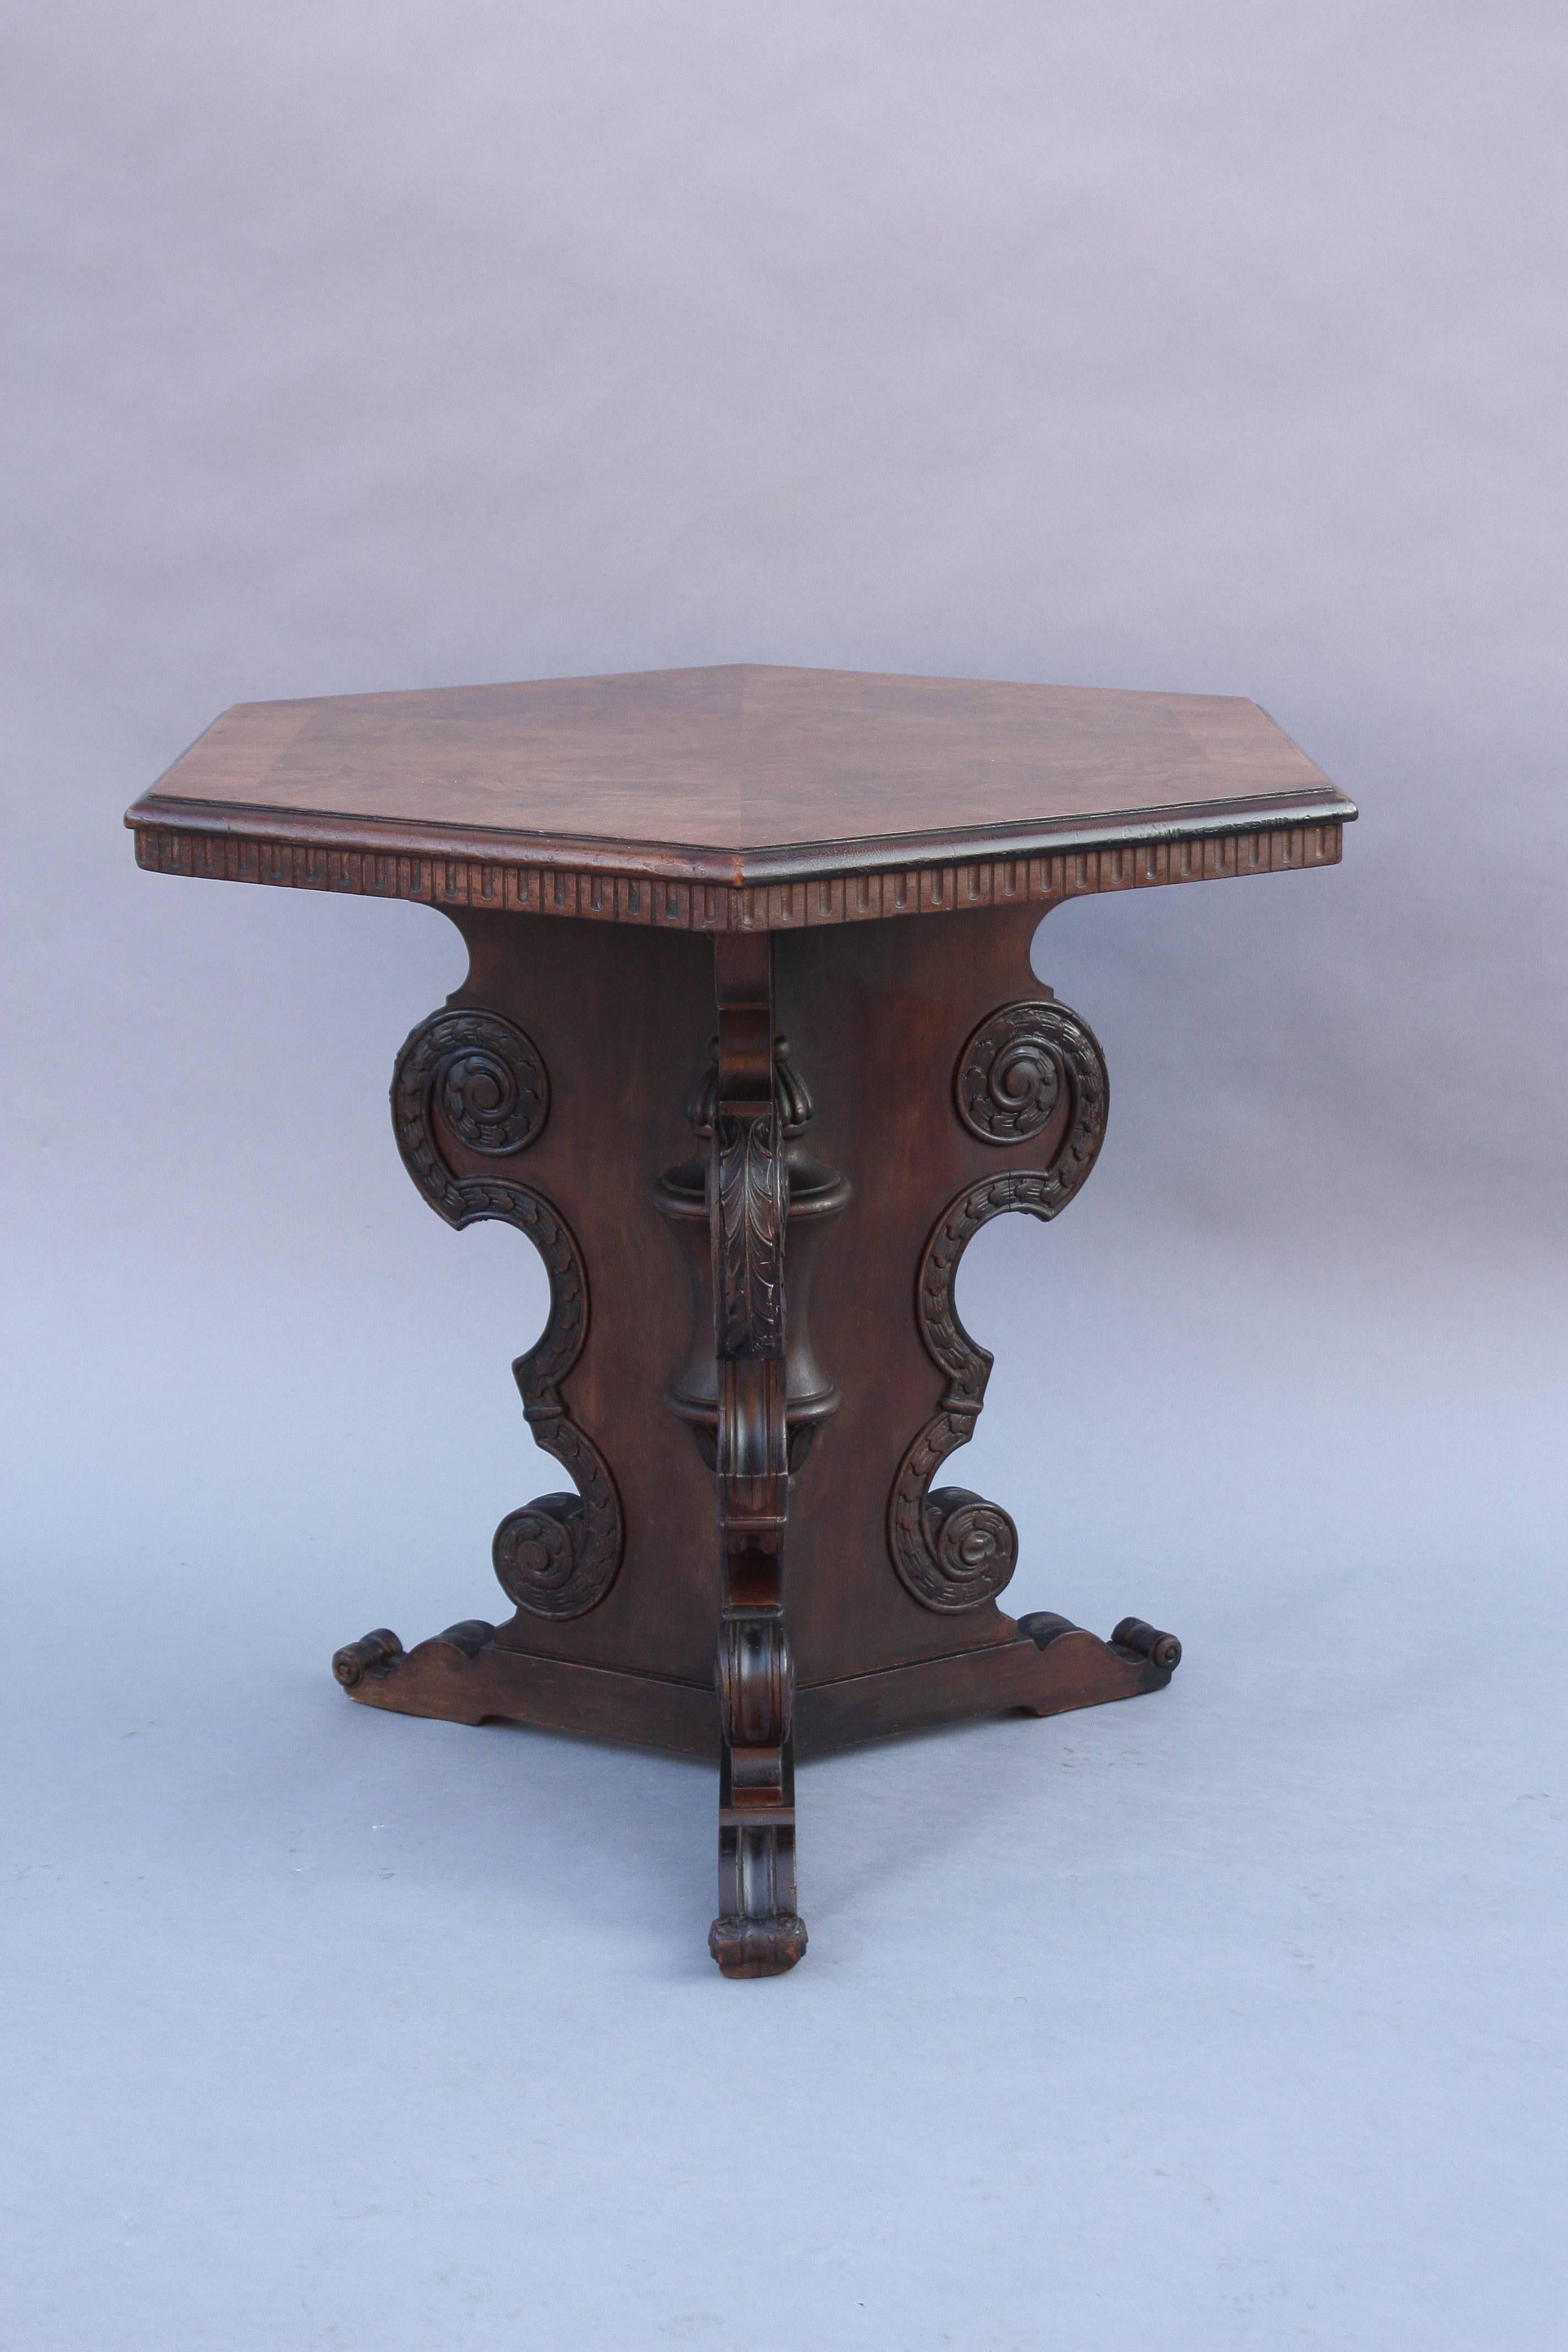 Spanish Colonial 1920s Hexagonal Walnut Table with Pedestal Base